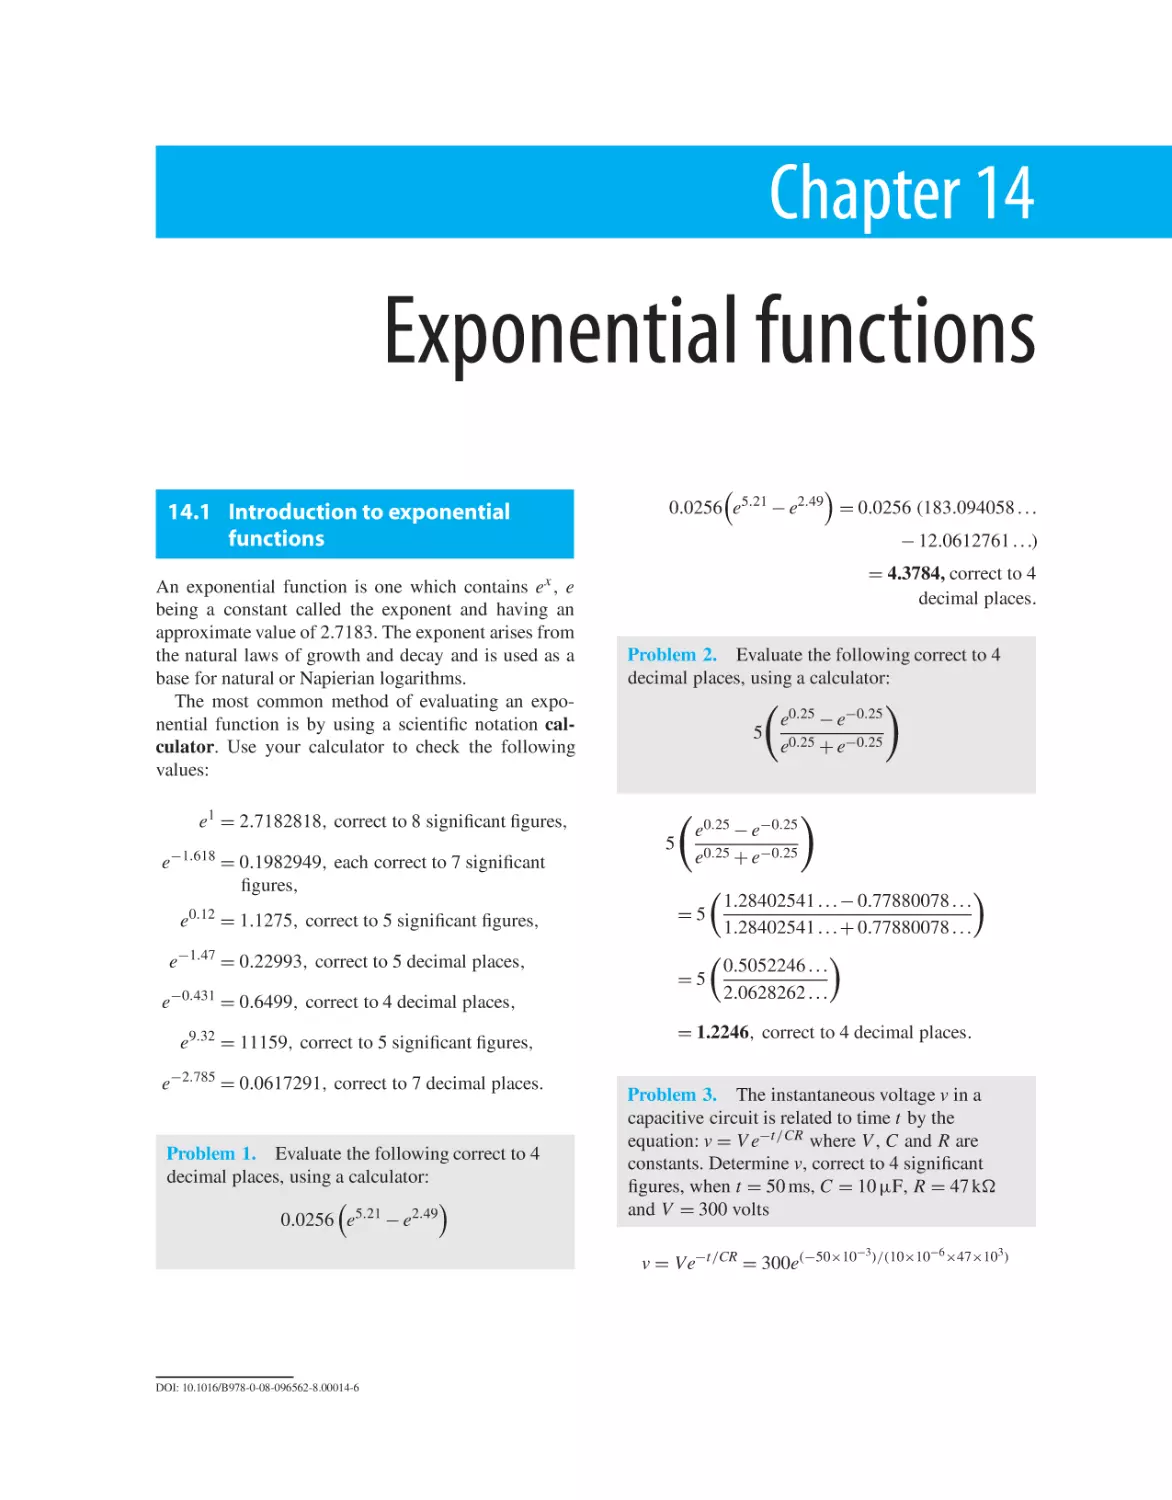 Chapter 14. Exponential functions
14.1 Introduction to exponential functions